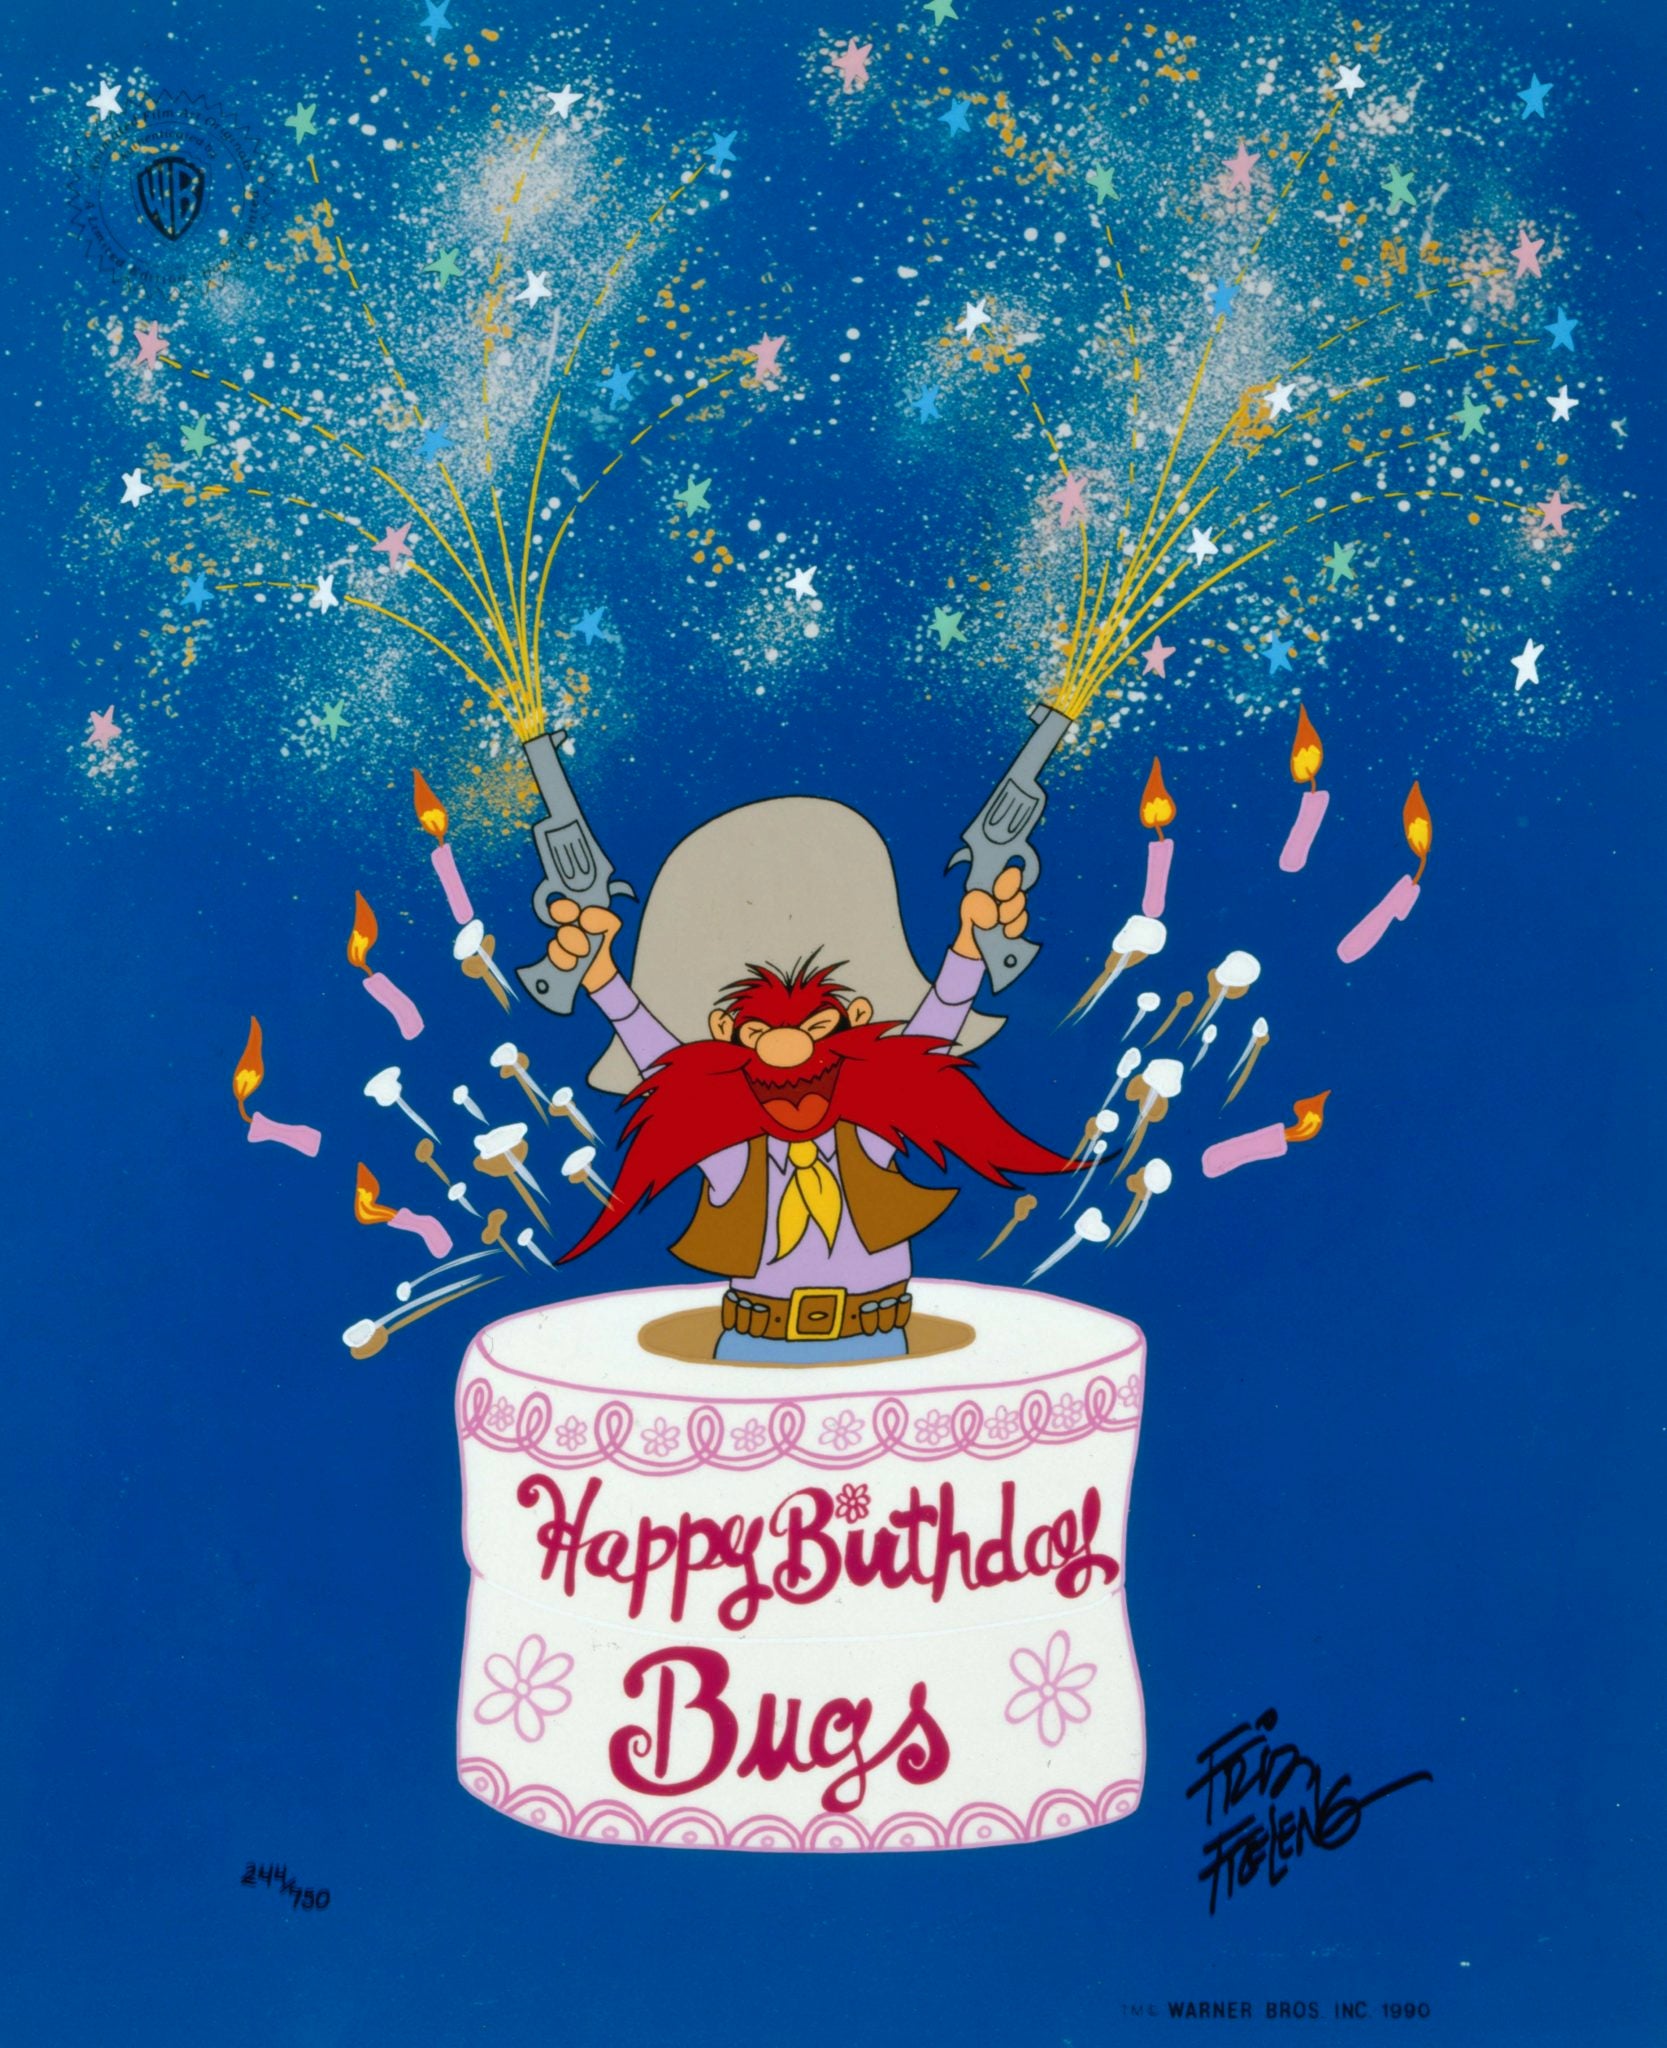 Yosemite Sam pops out of a birthday cake to wish BUGS a Root’n-Toot’n 50th Birthday. 